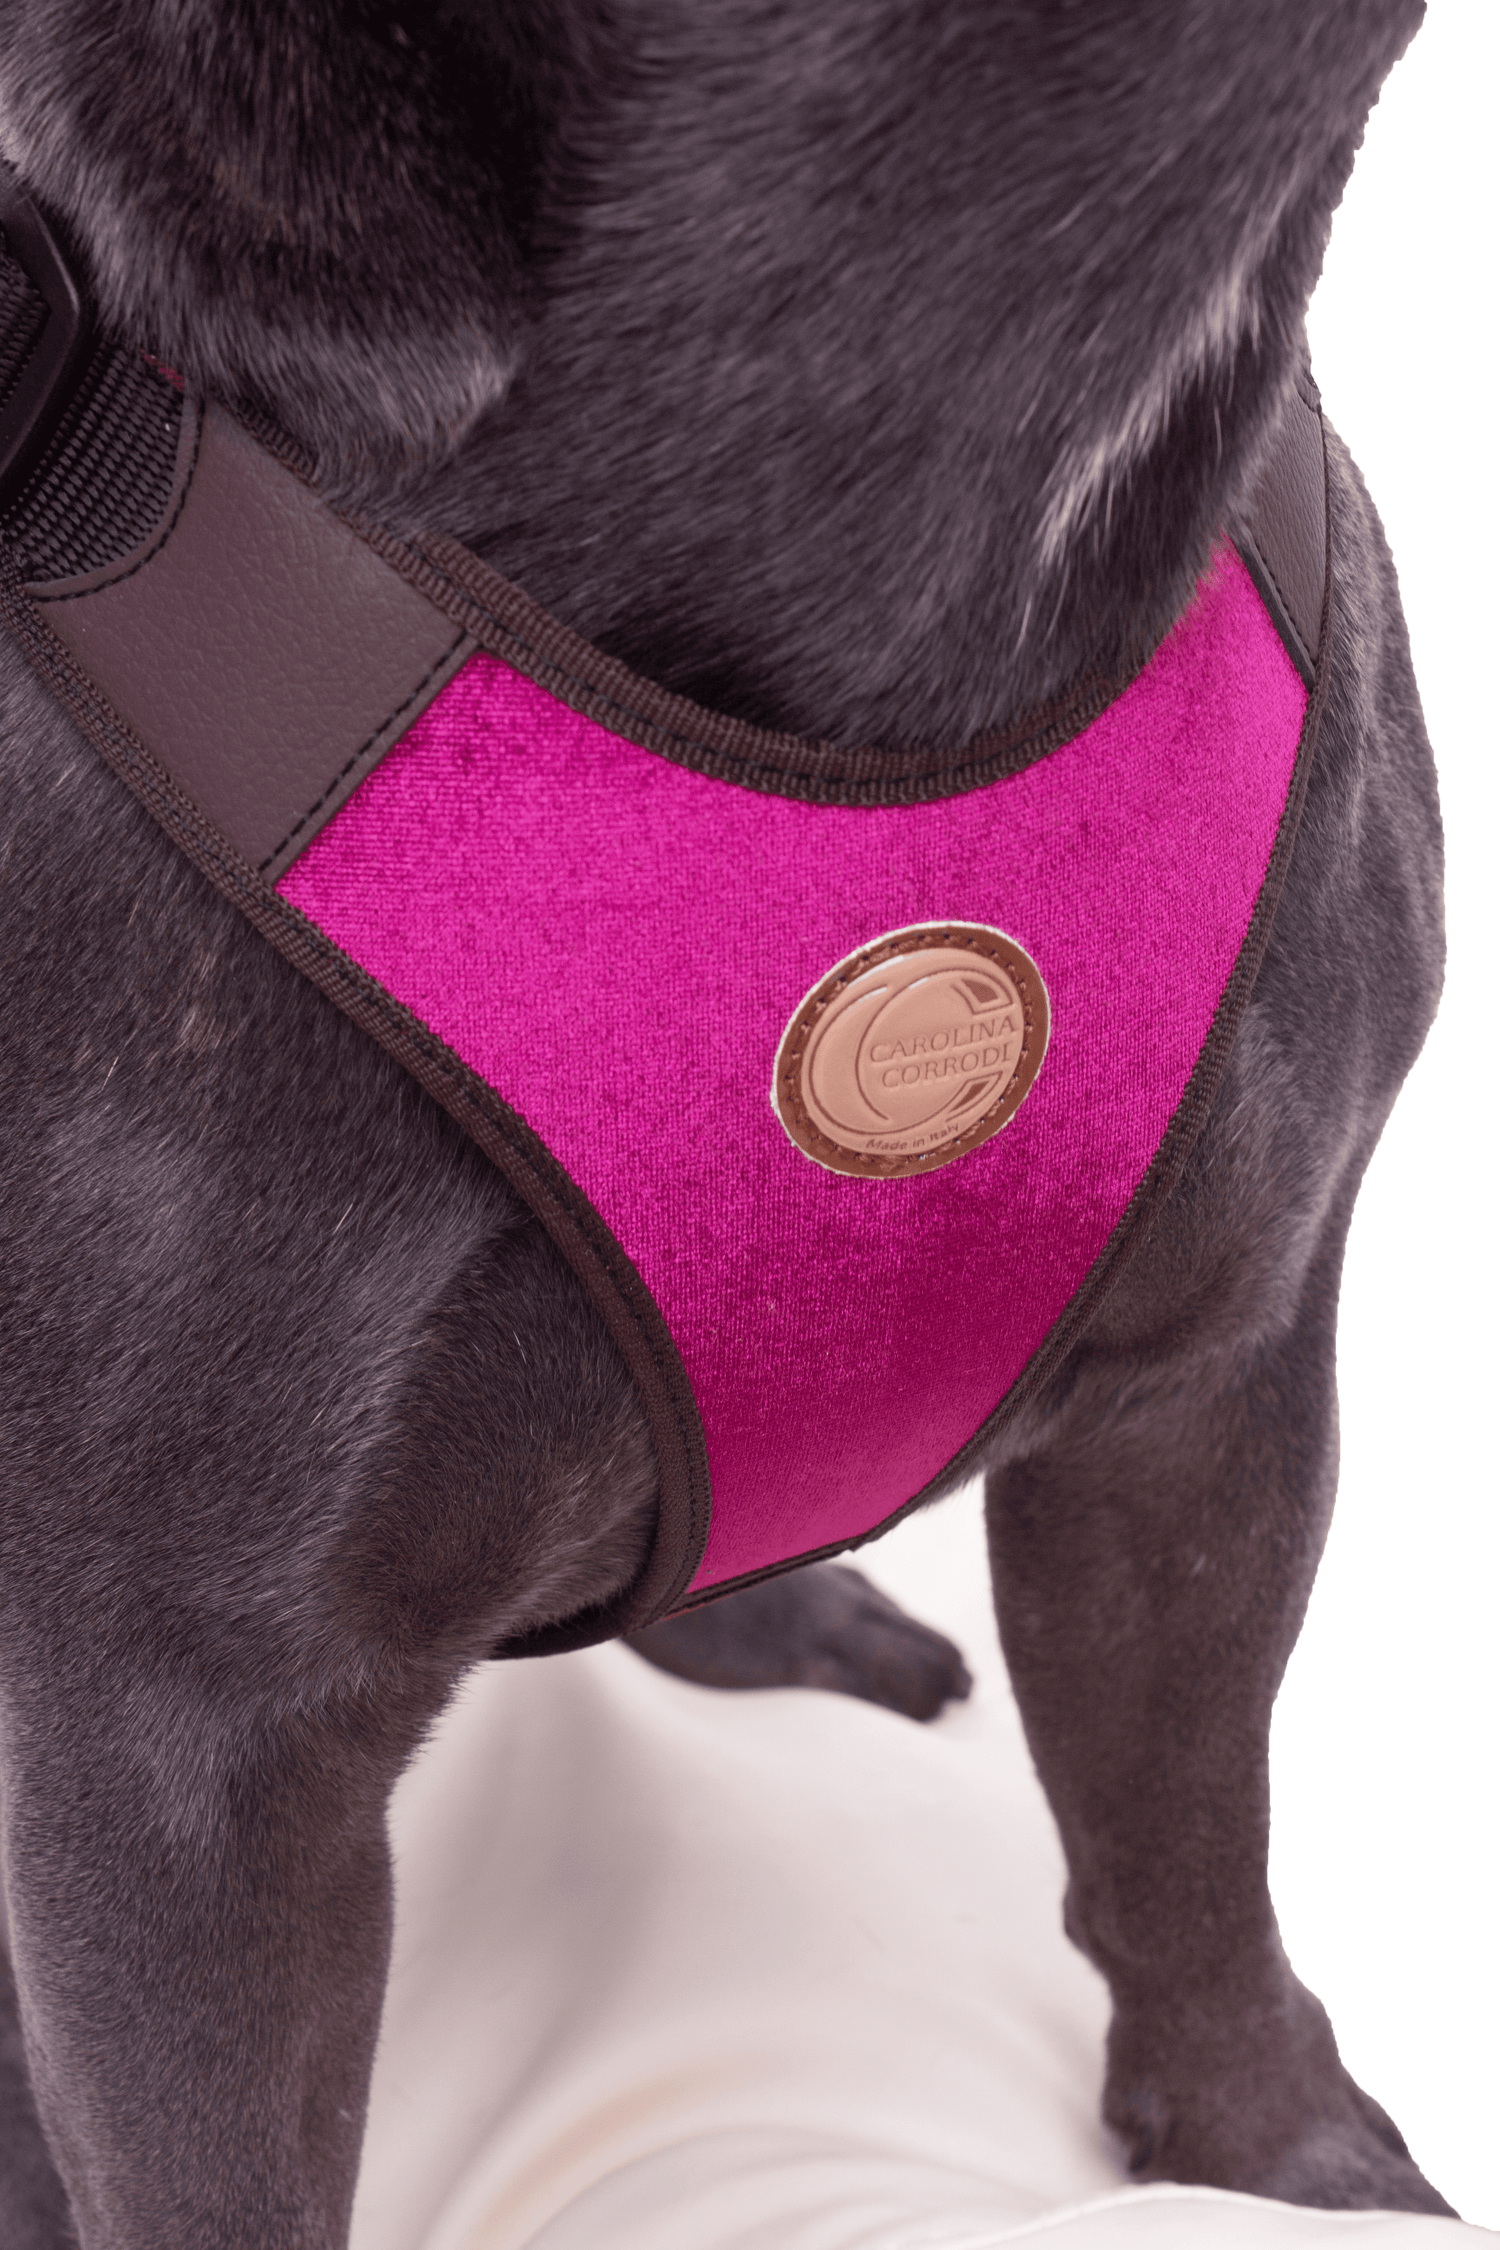 Dog harness with matching leash